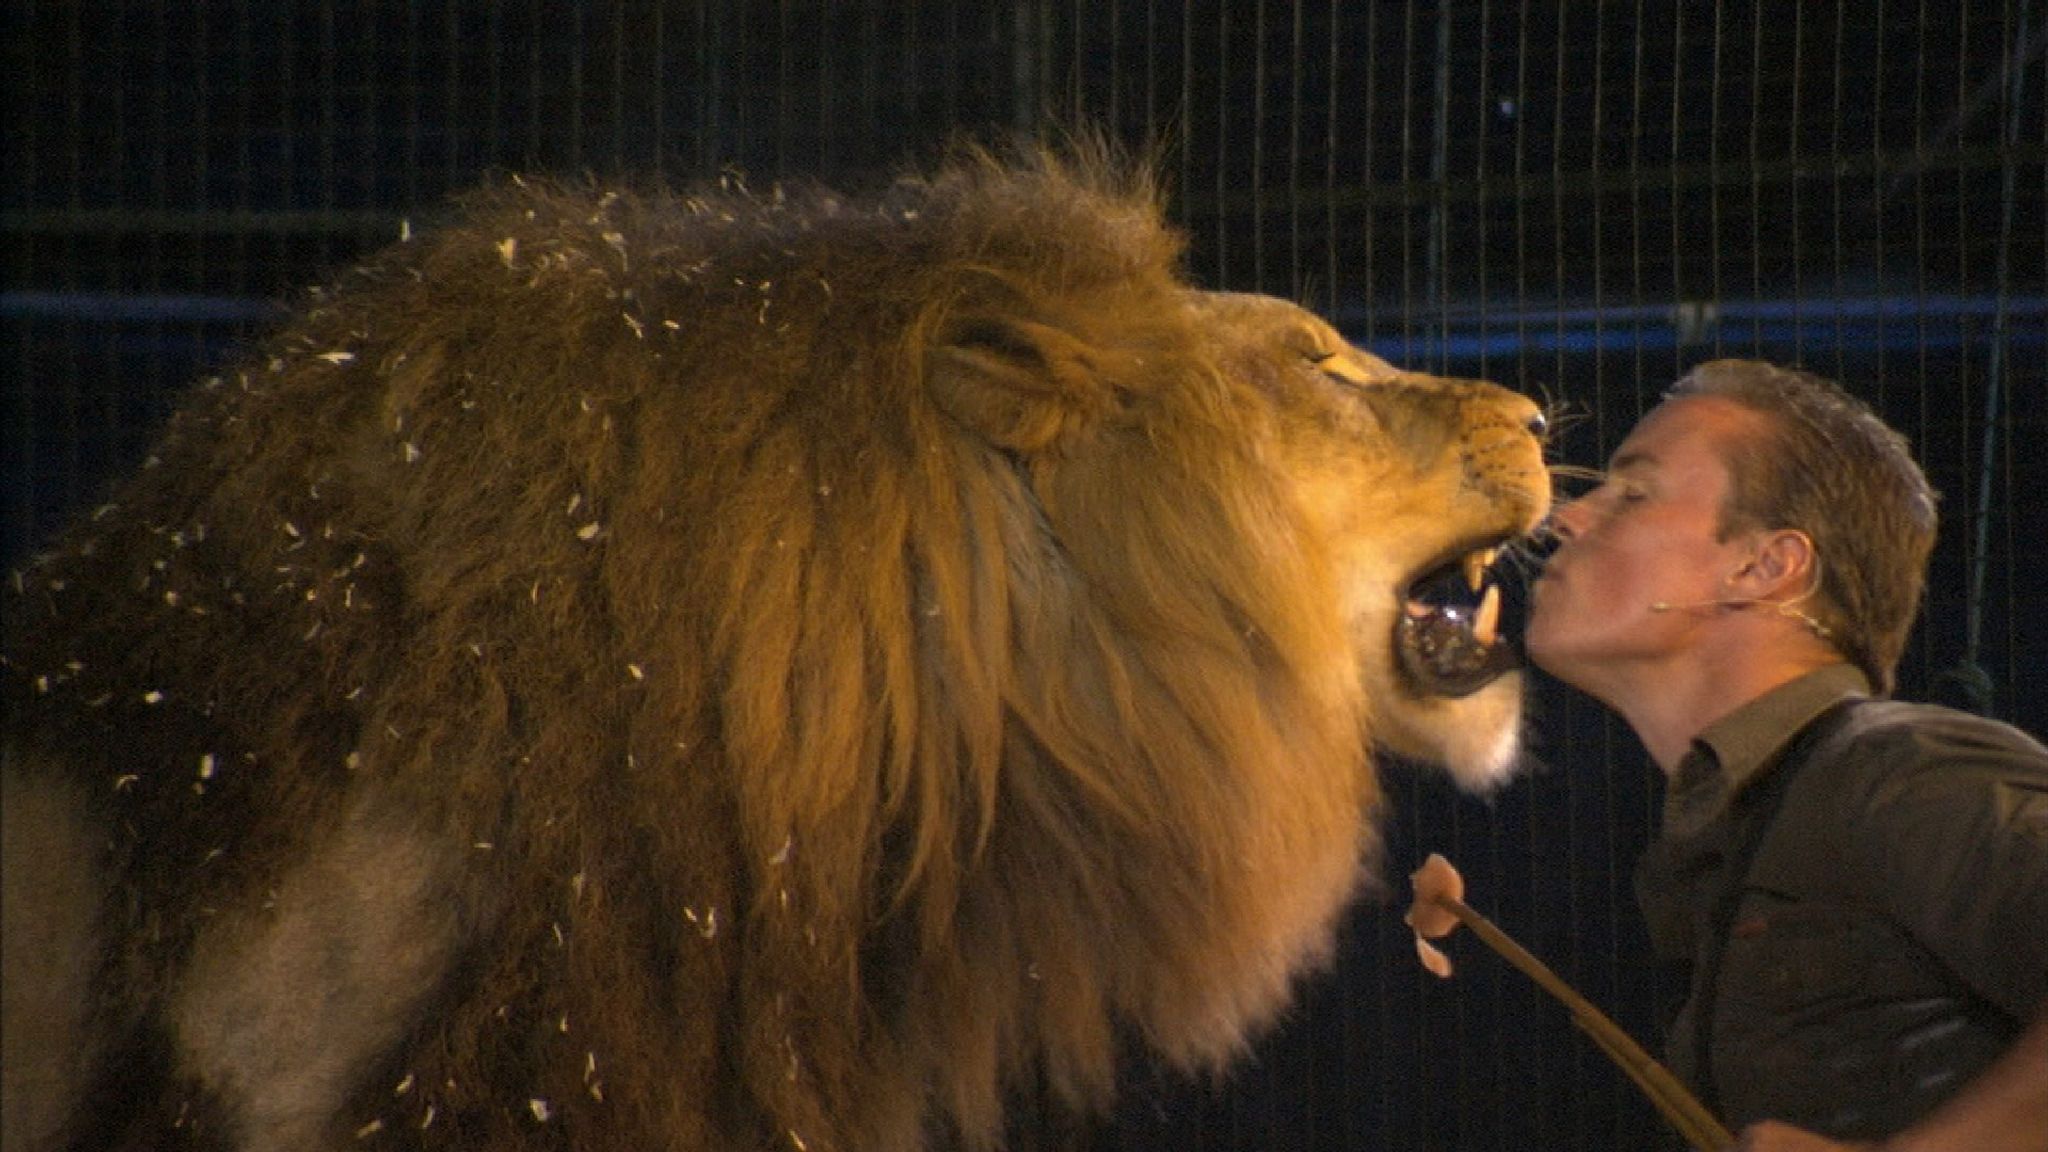 Britain's last lion tamer 'more determined than ever' despite rejection |  UK News | Sky News